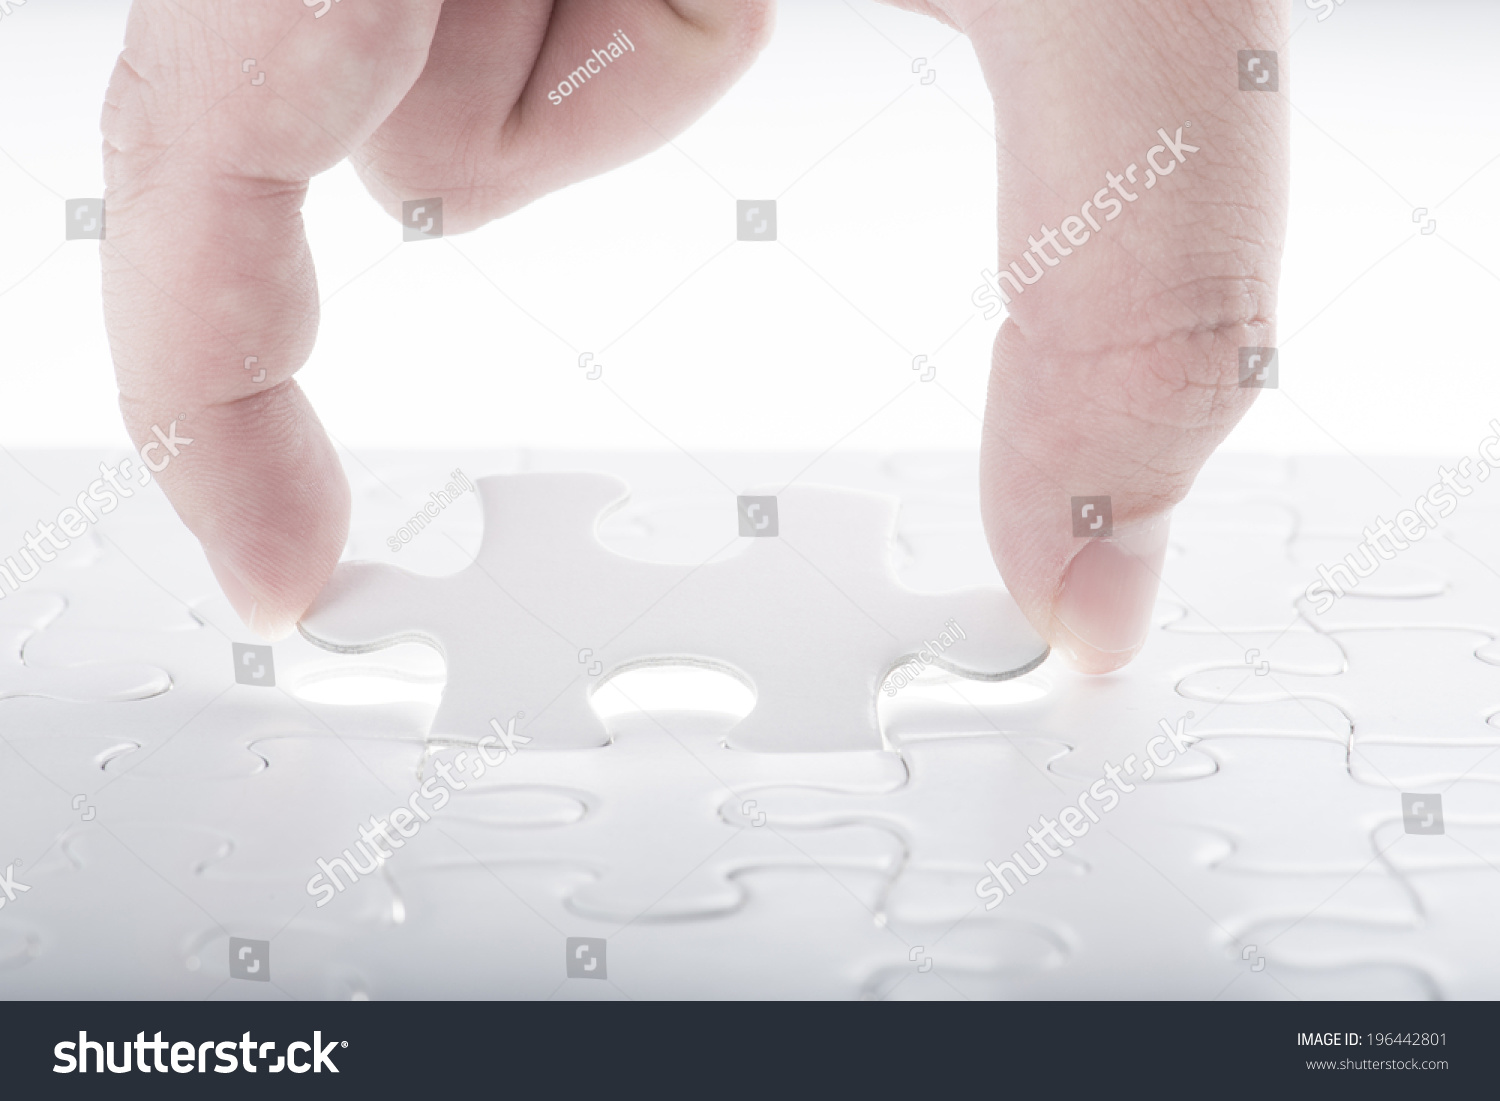 Missing jigsaw puzzle piece with light glow, business concept for completing the final puzzle piece #196442801